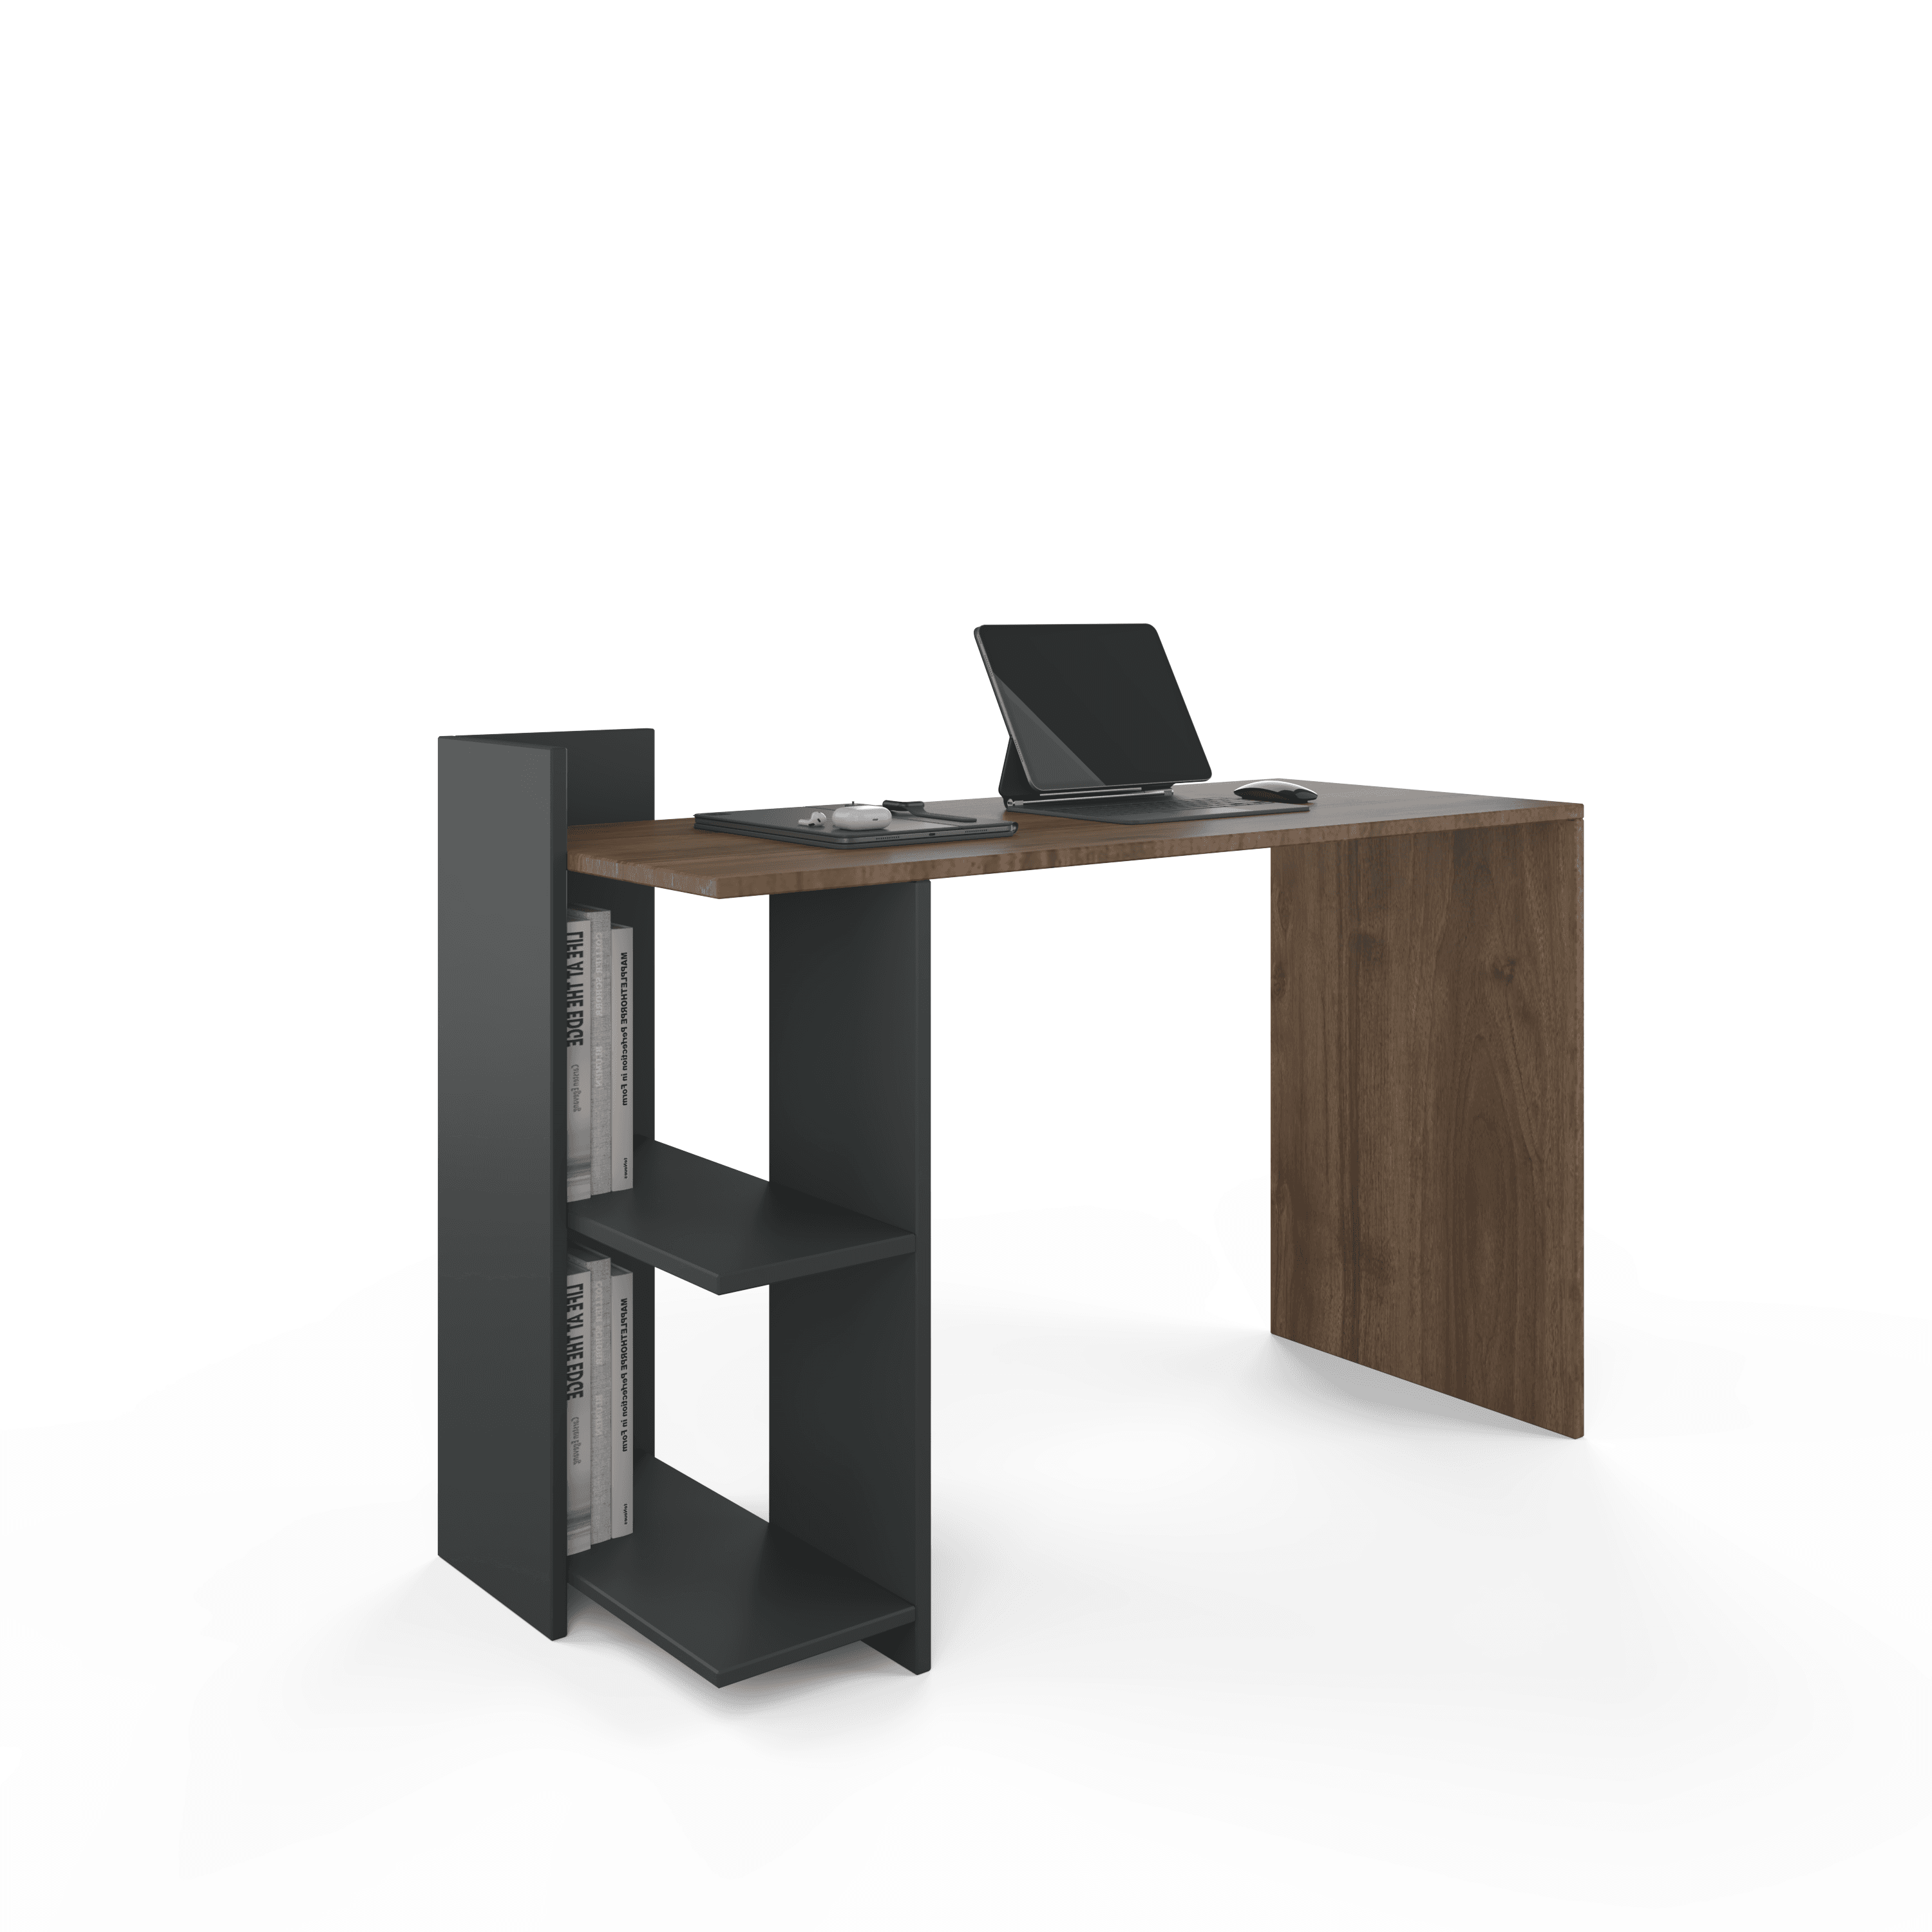 Malta Office Table - Anthracite - Walnut Color